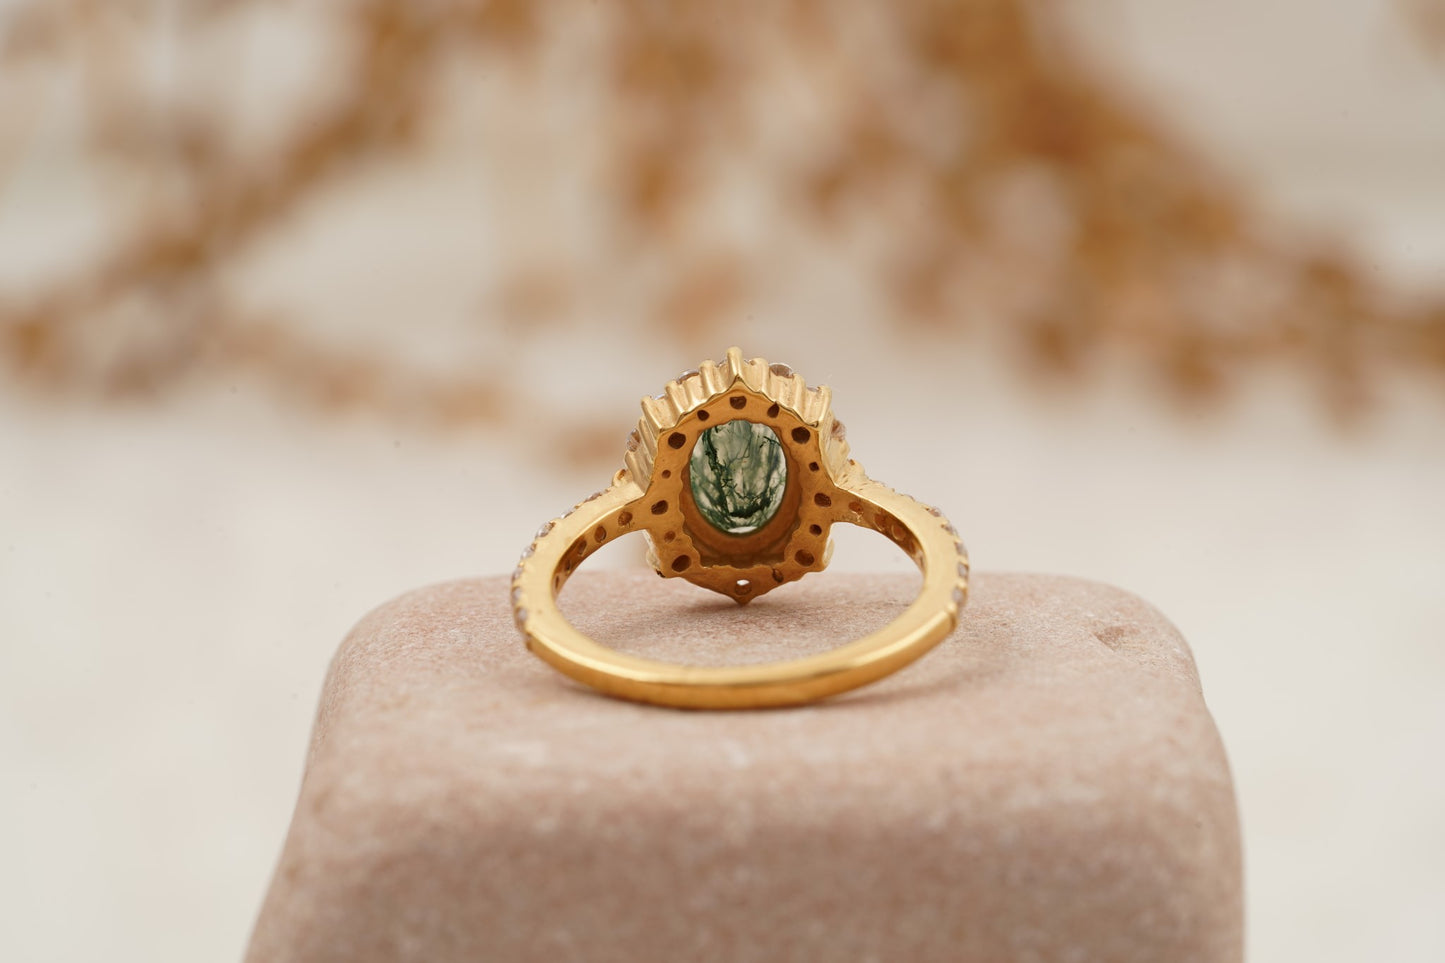 Oval Moss Agate Halo Diamond Engagement Ring 14K Yellow Gold